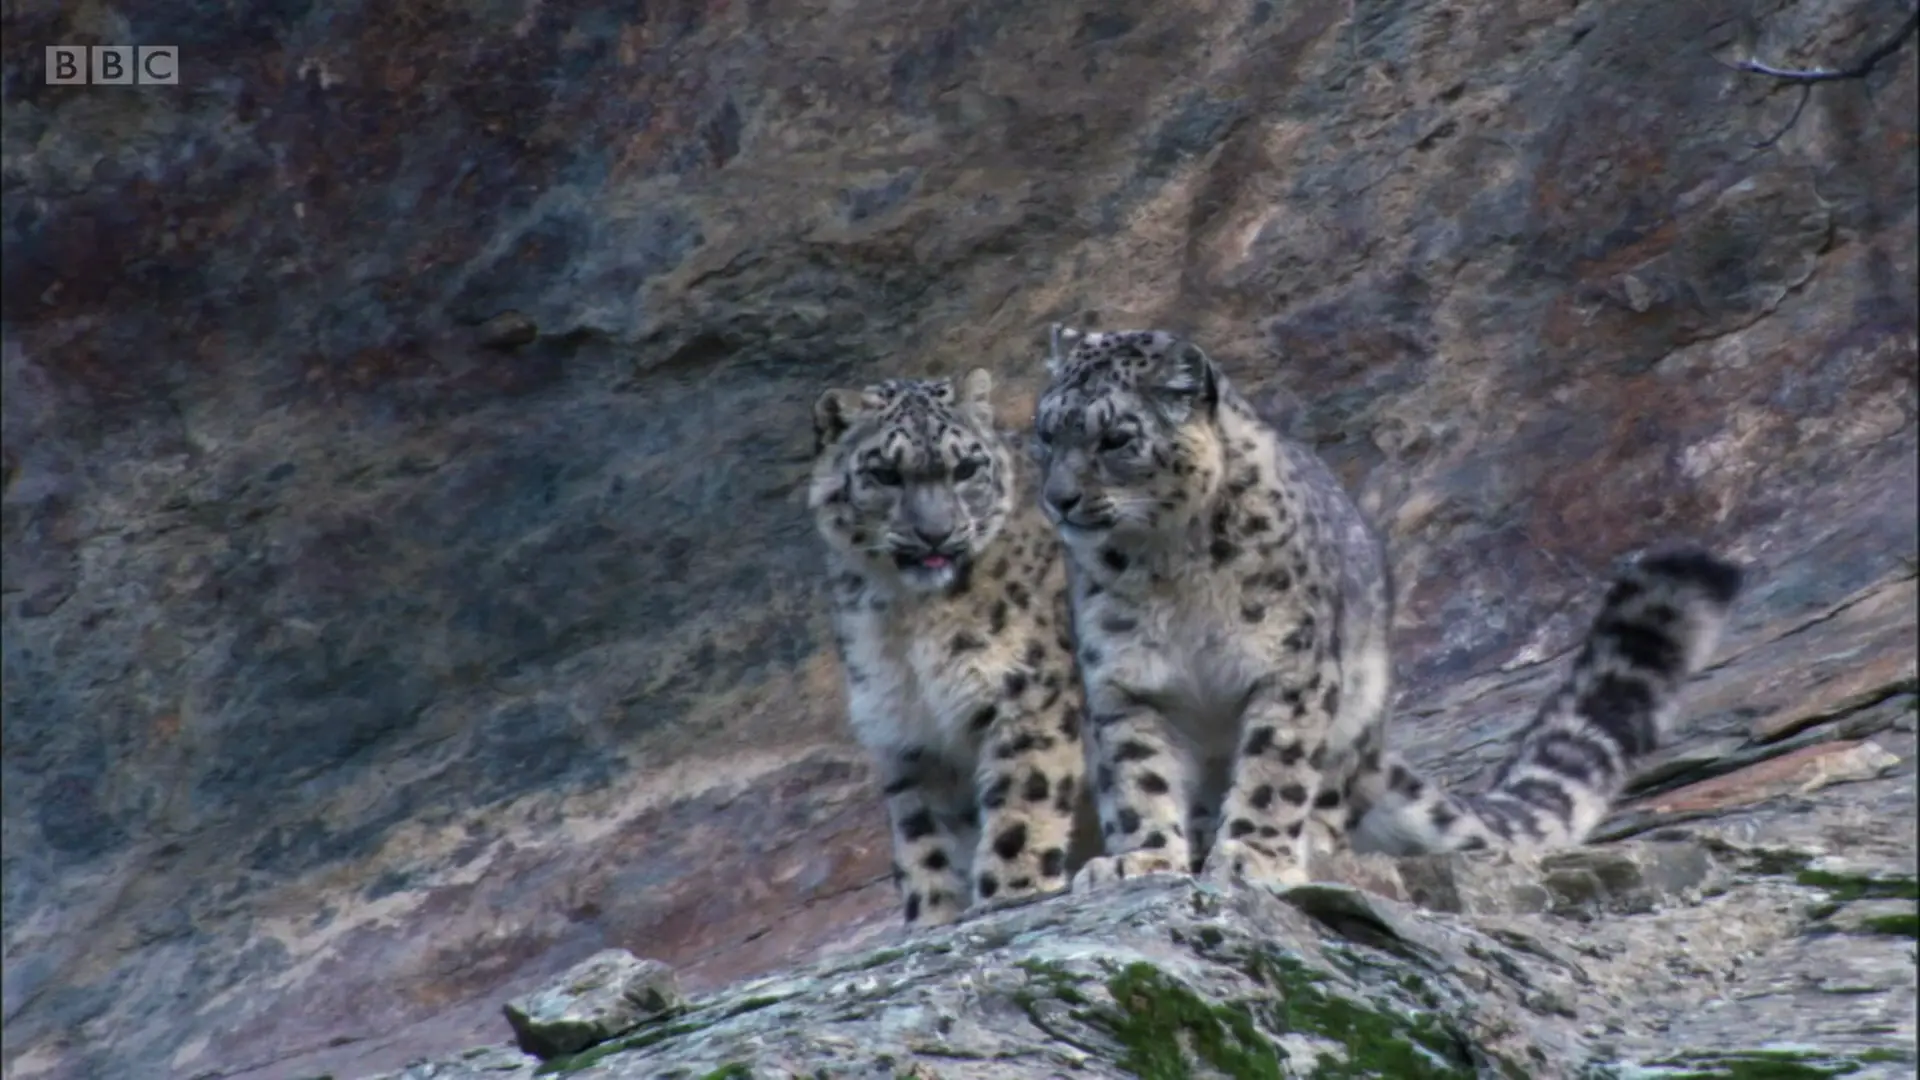 Snow leopard (Panthera uncia) as shown in Planet Earth - Mountains